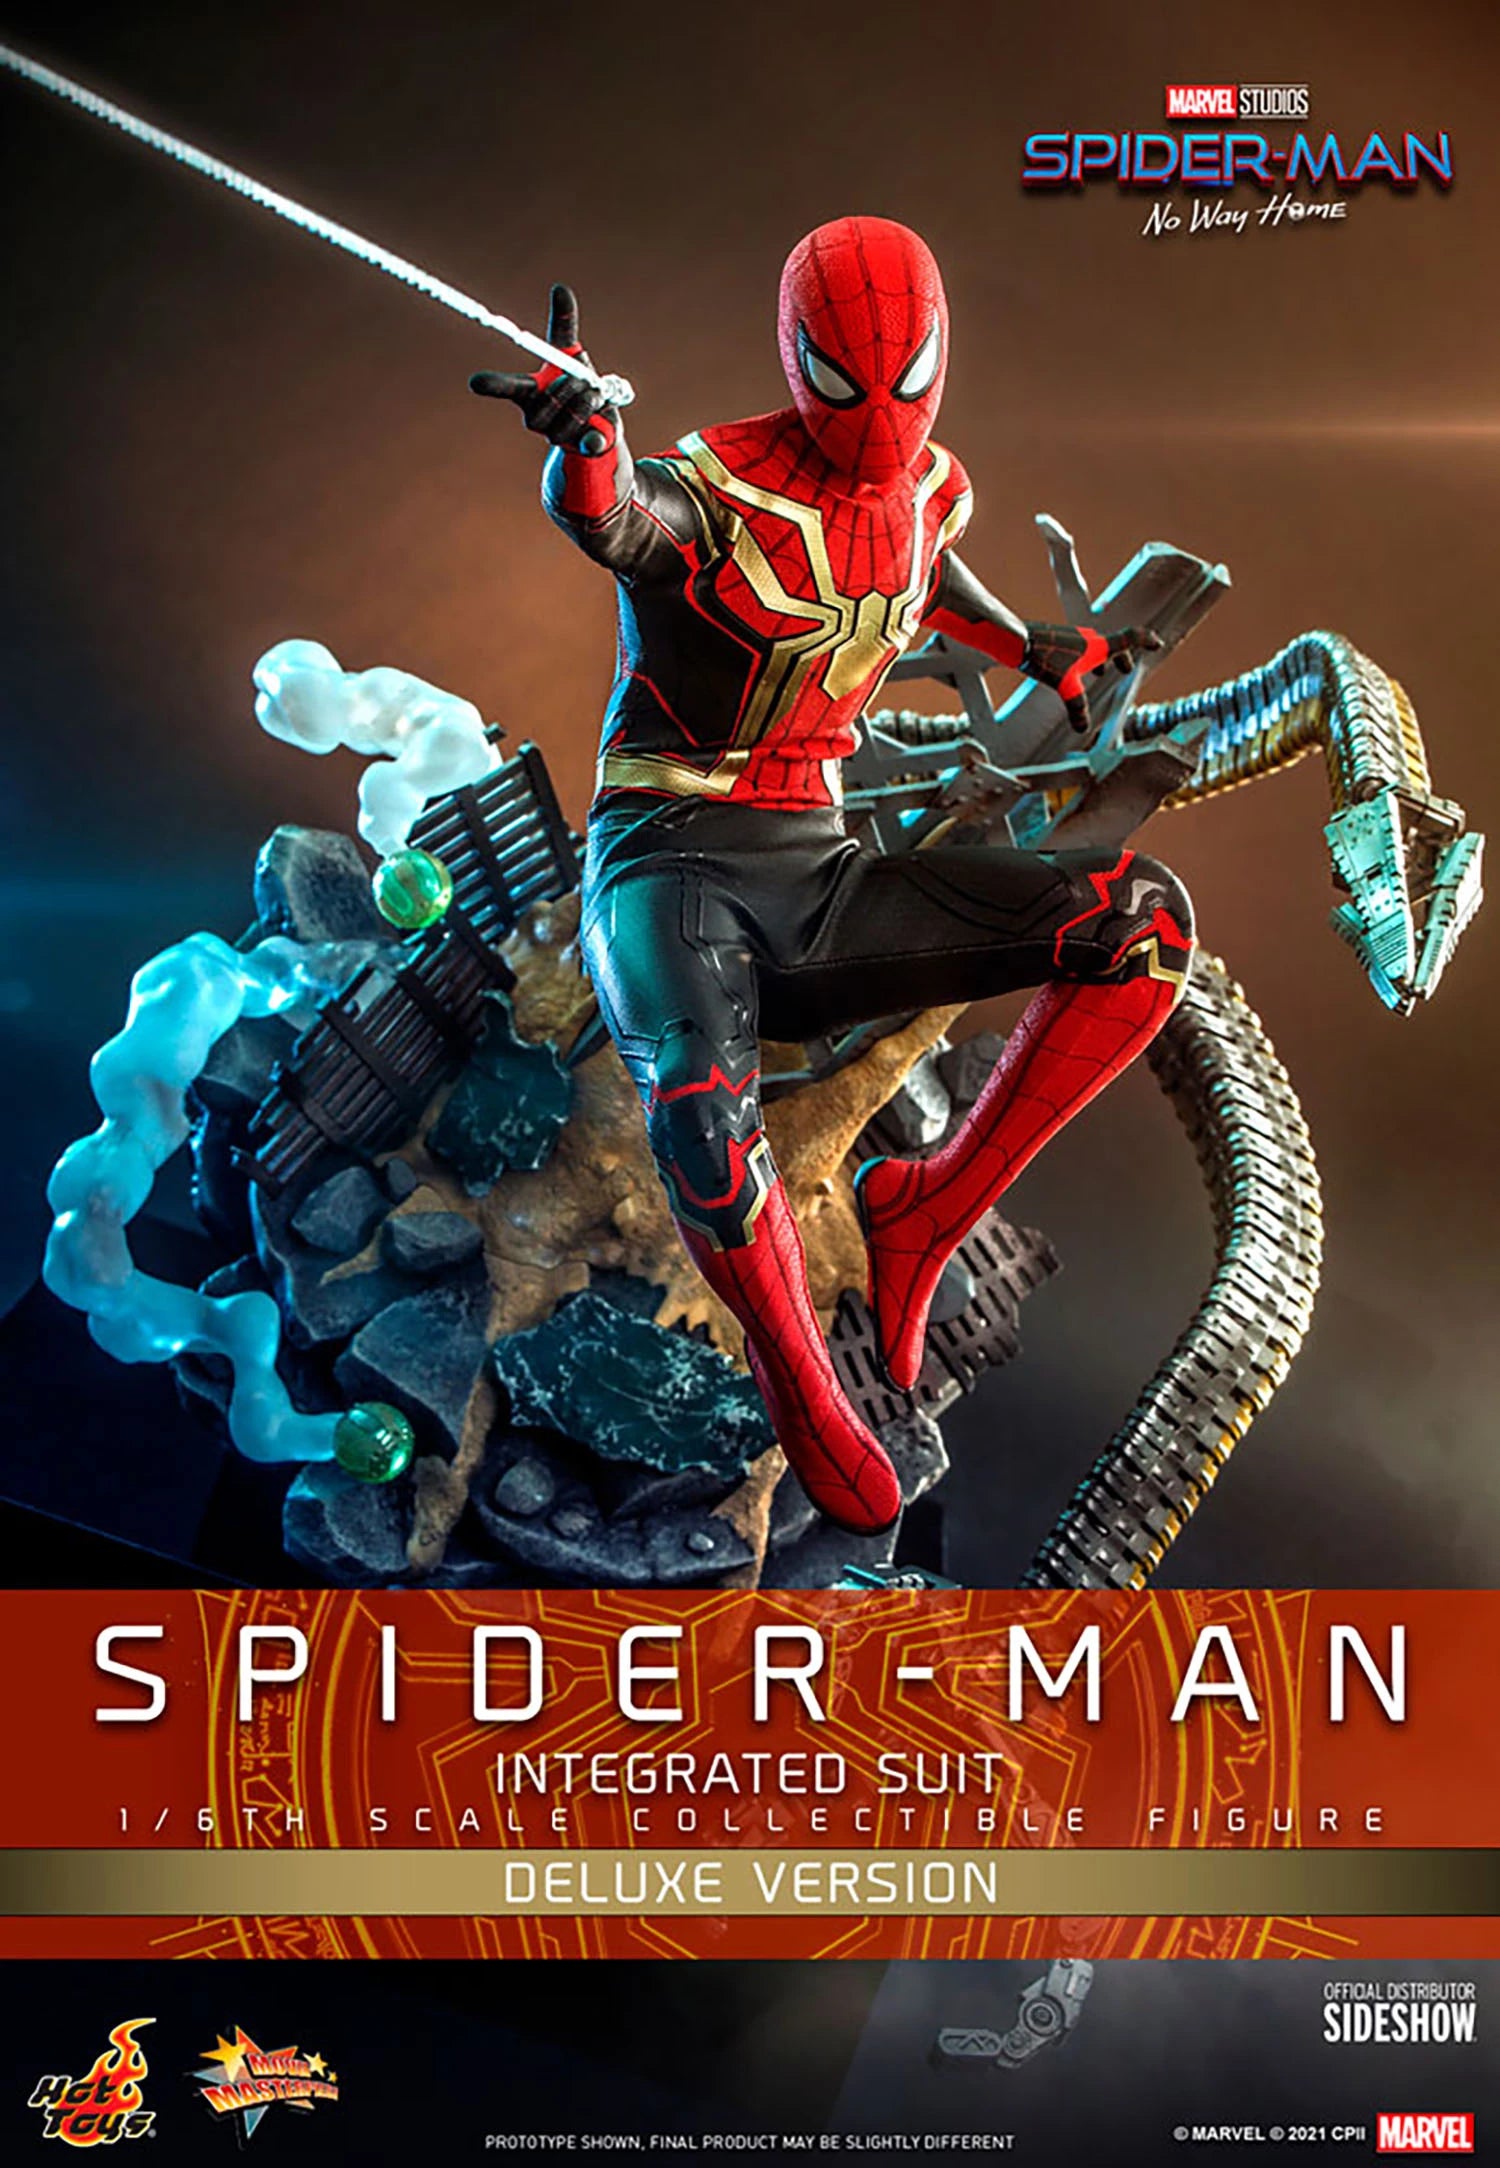 SPIDER-MAN (INTEGRATED SUIT) DELUXE VERSION Sixth Scale Figure By Hot Toys